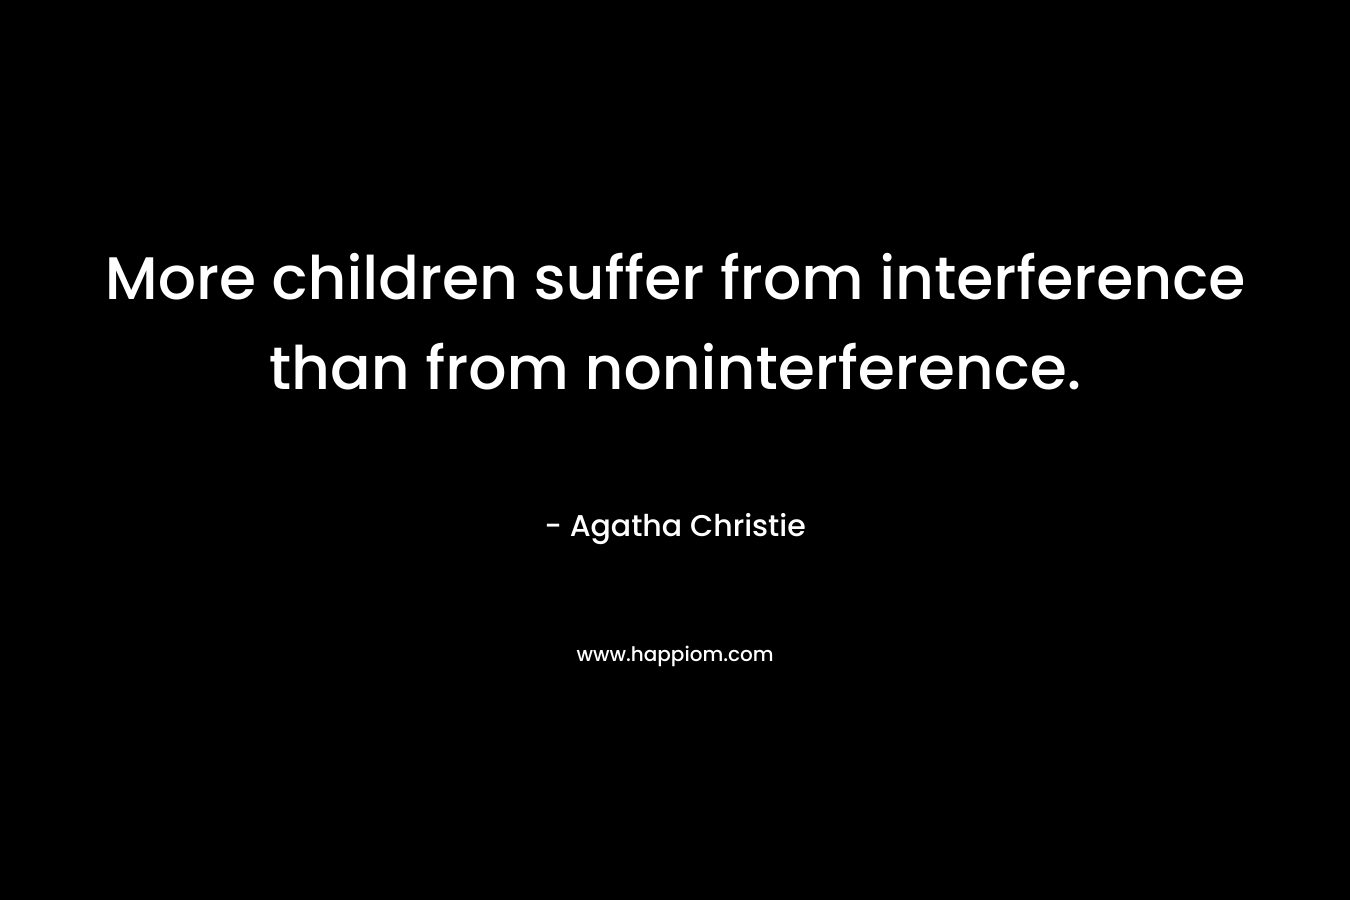 More children suffer from interference than from noninterference. – Agatha Christie